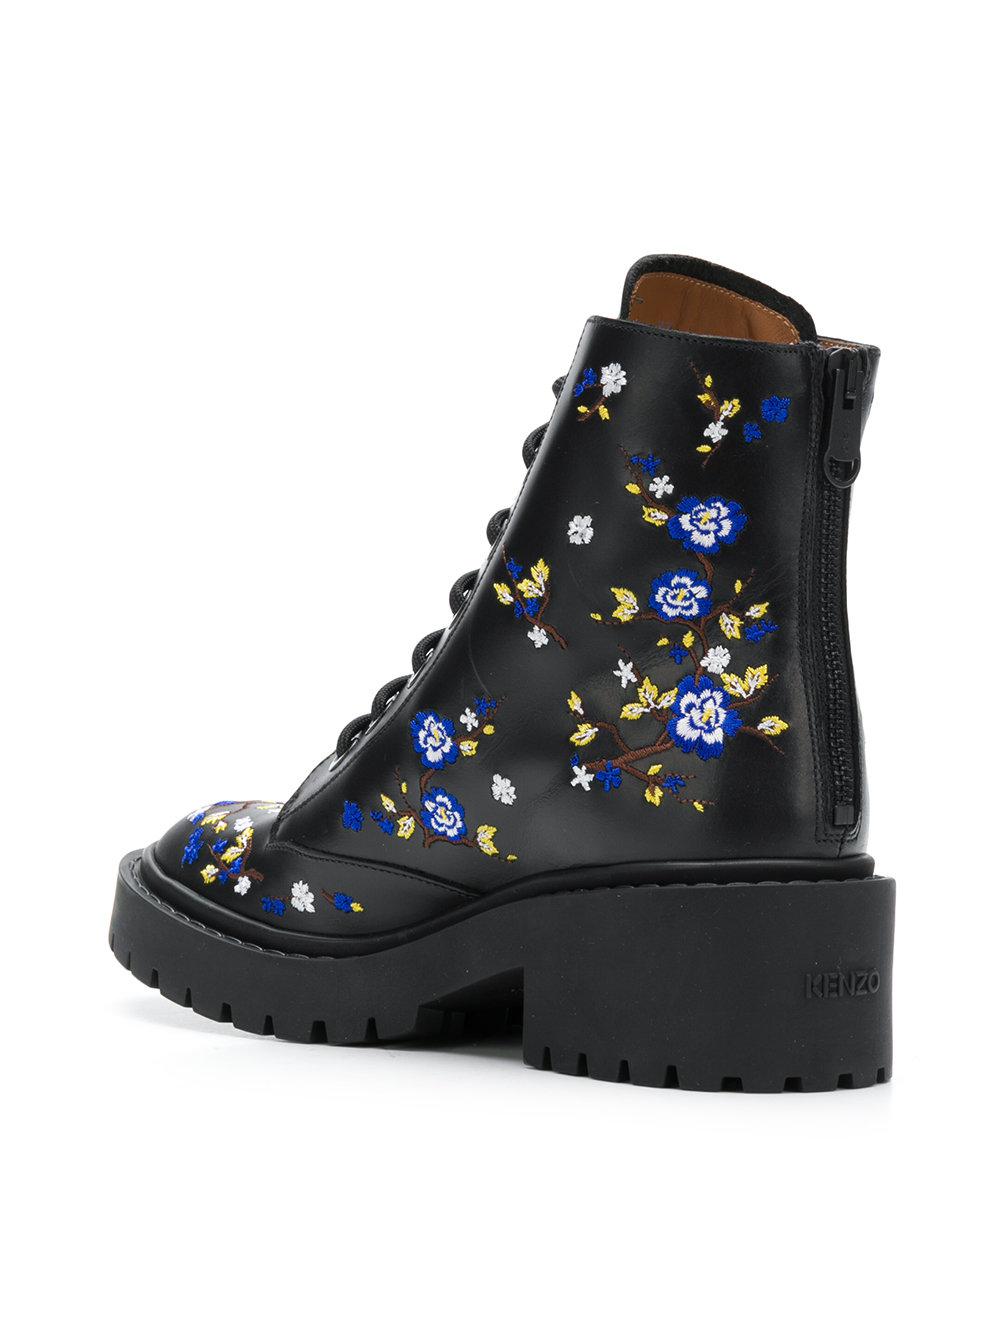 KENZO Leather Black Floral Pike Boots 